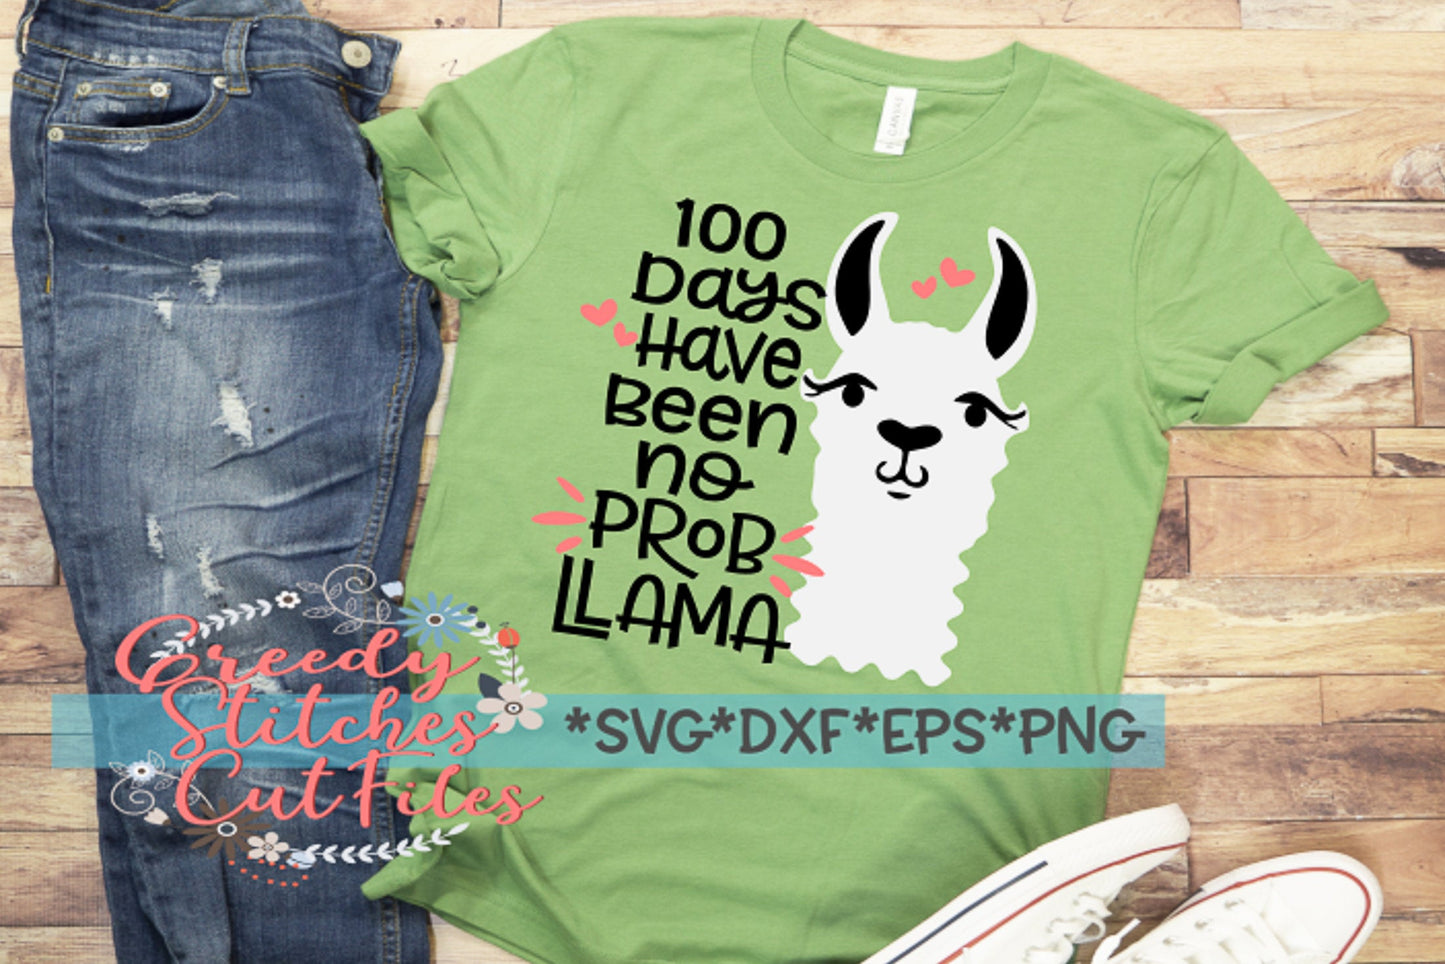 100 Days Have Been No Prob Llama svg dxf eps png. Llama SvG | 100 Days Of School SvG | 100 Days SvG | School | Instant Download Cut File